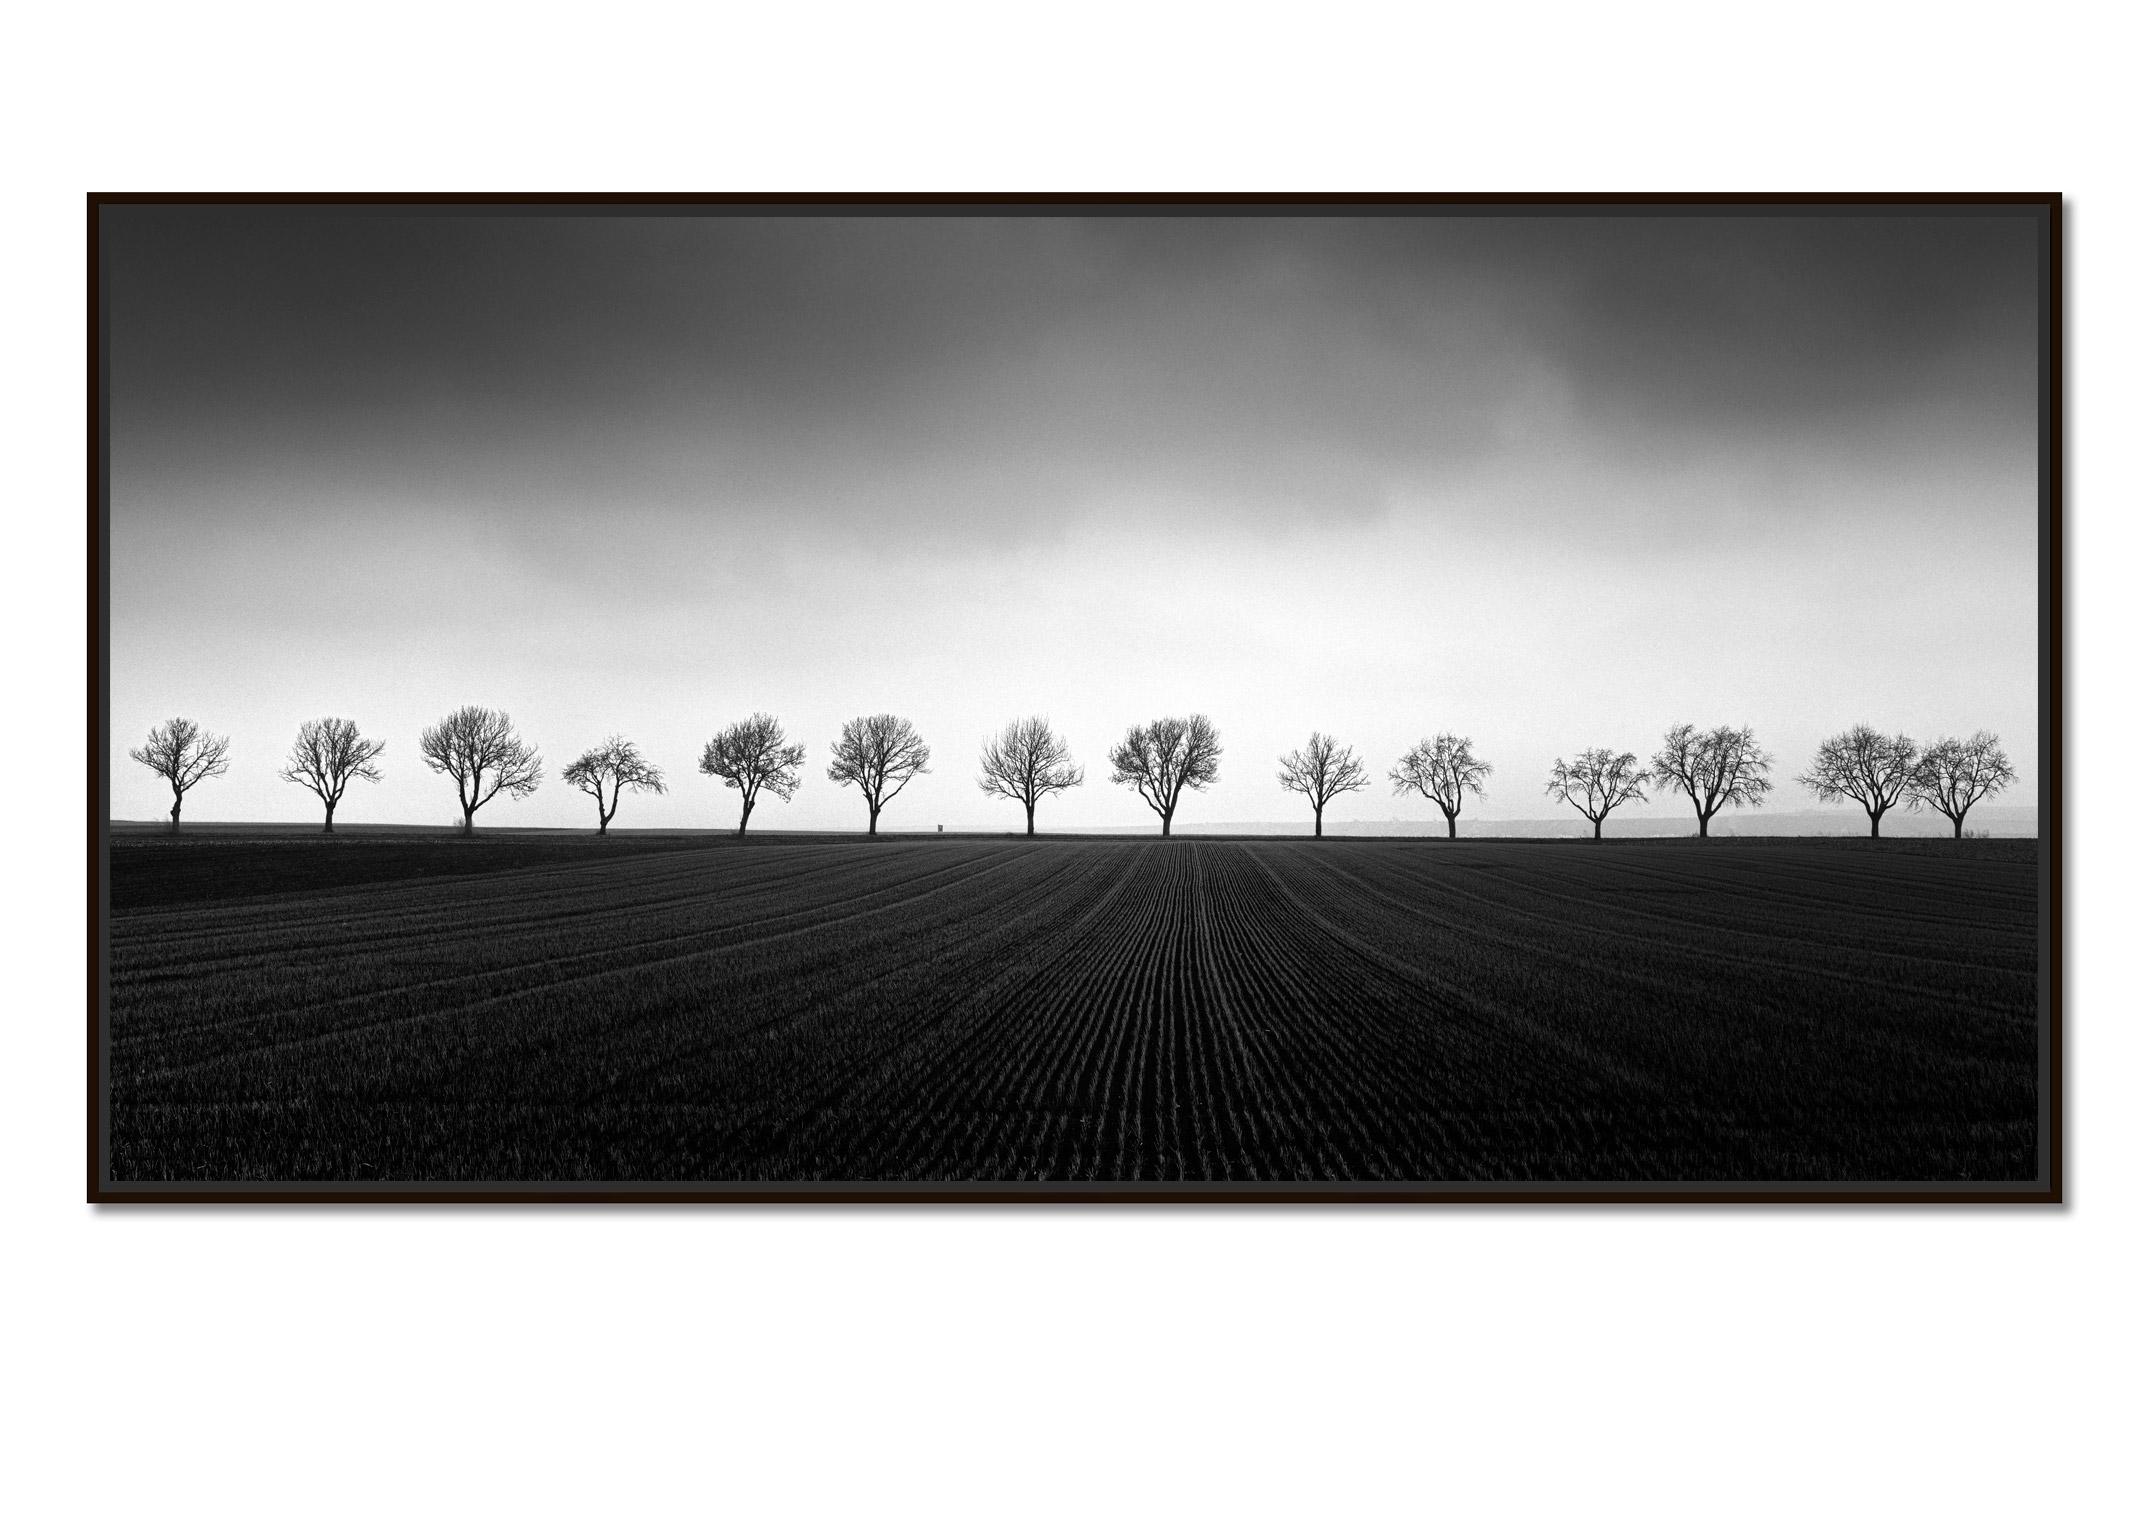 Fourteen Cherry Trees, Cornfield, black and white photography, art, landscape - Photograph by Gerald Berghammer